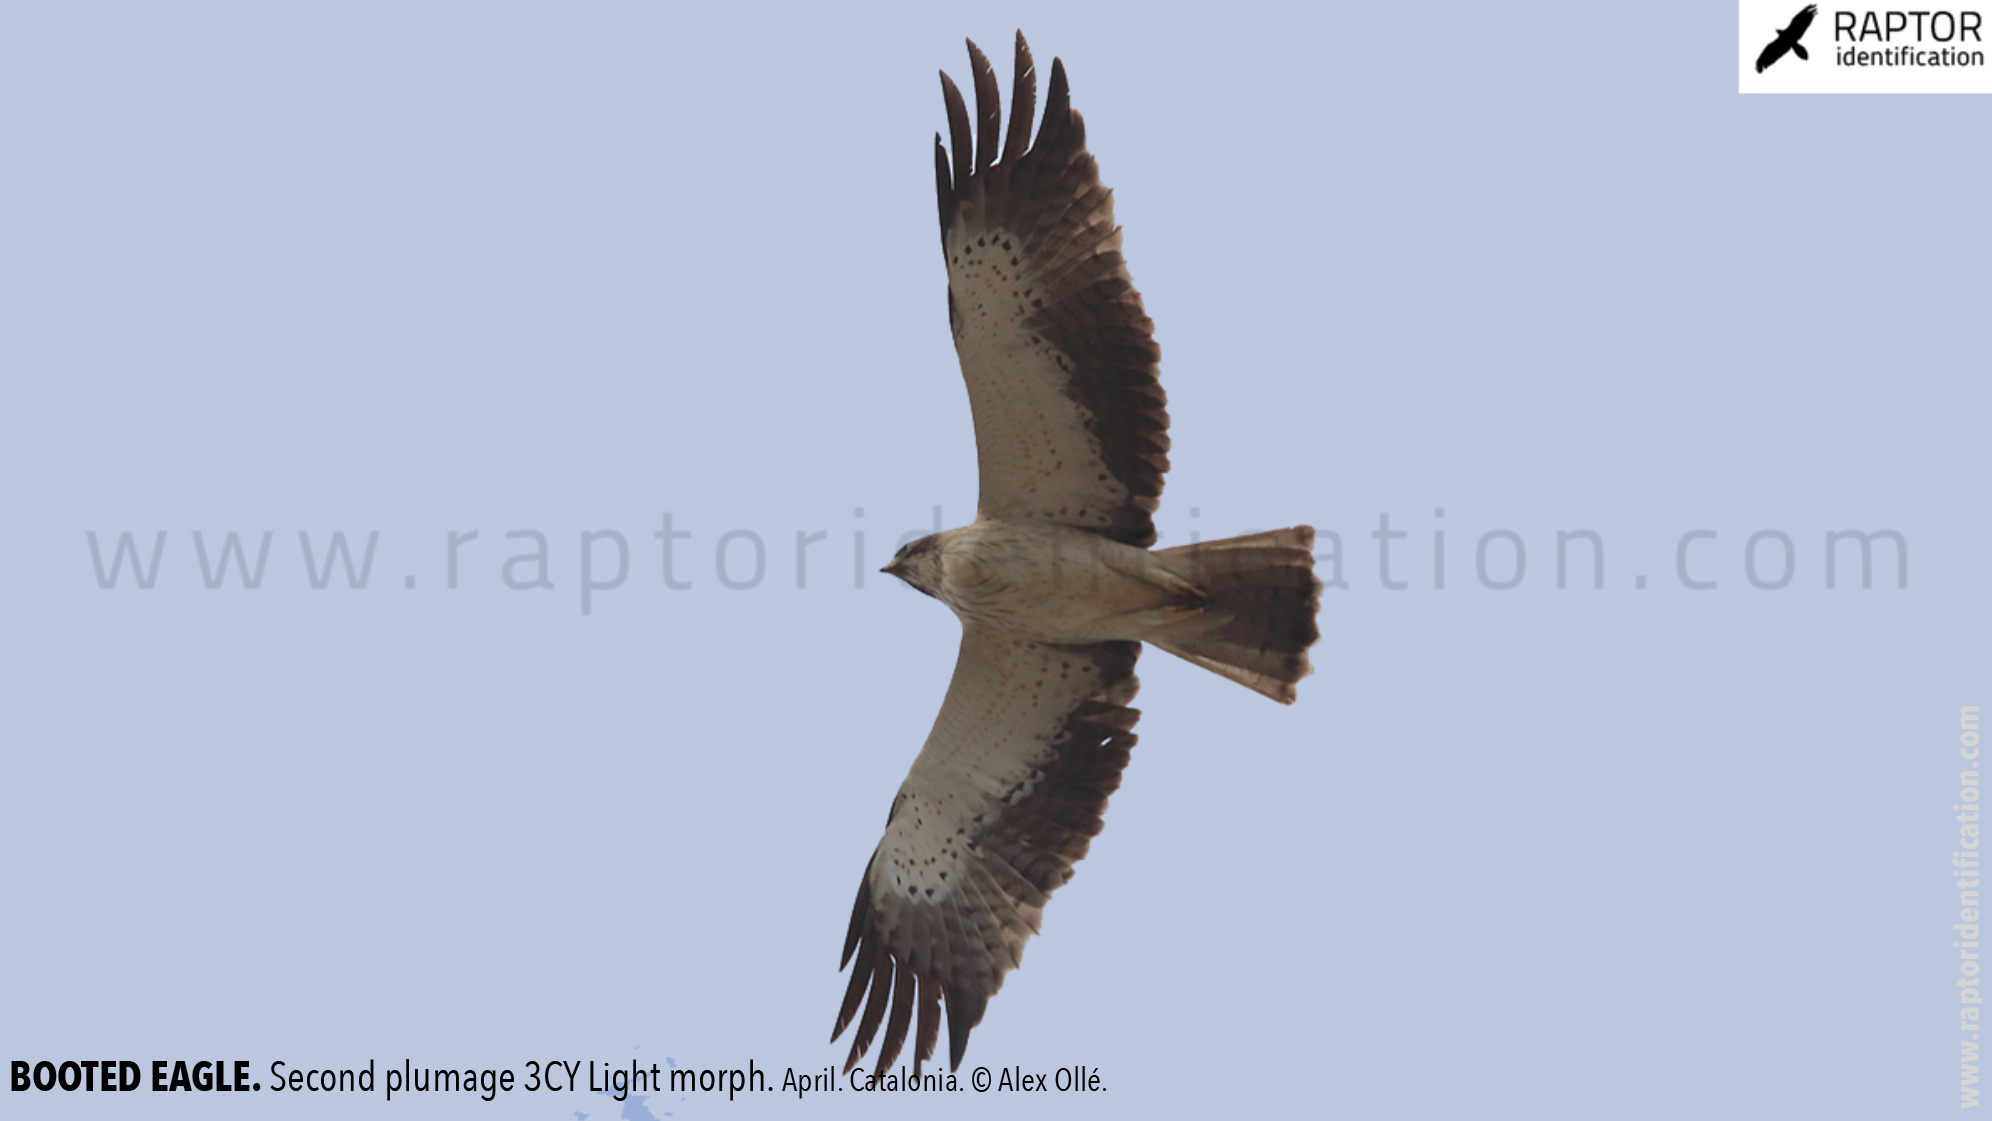 Booted-Eagle-Transitional-plumage-light-morph-identification